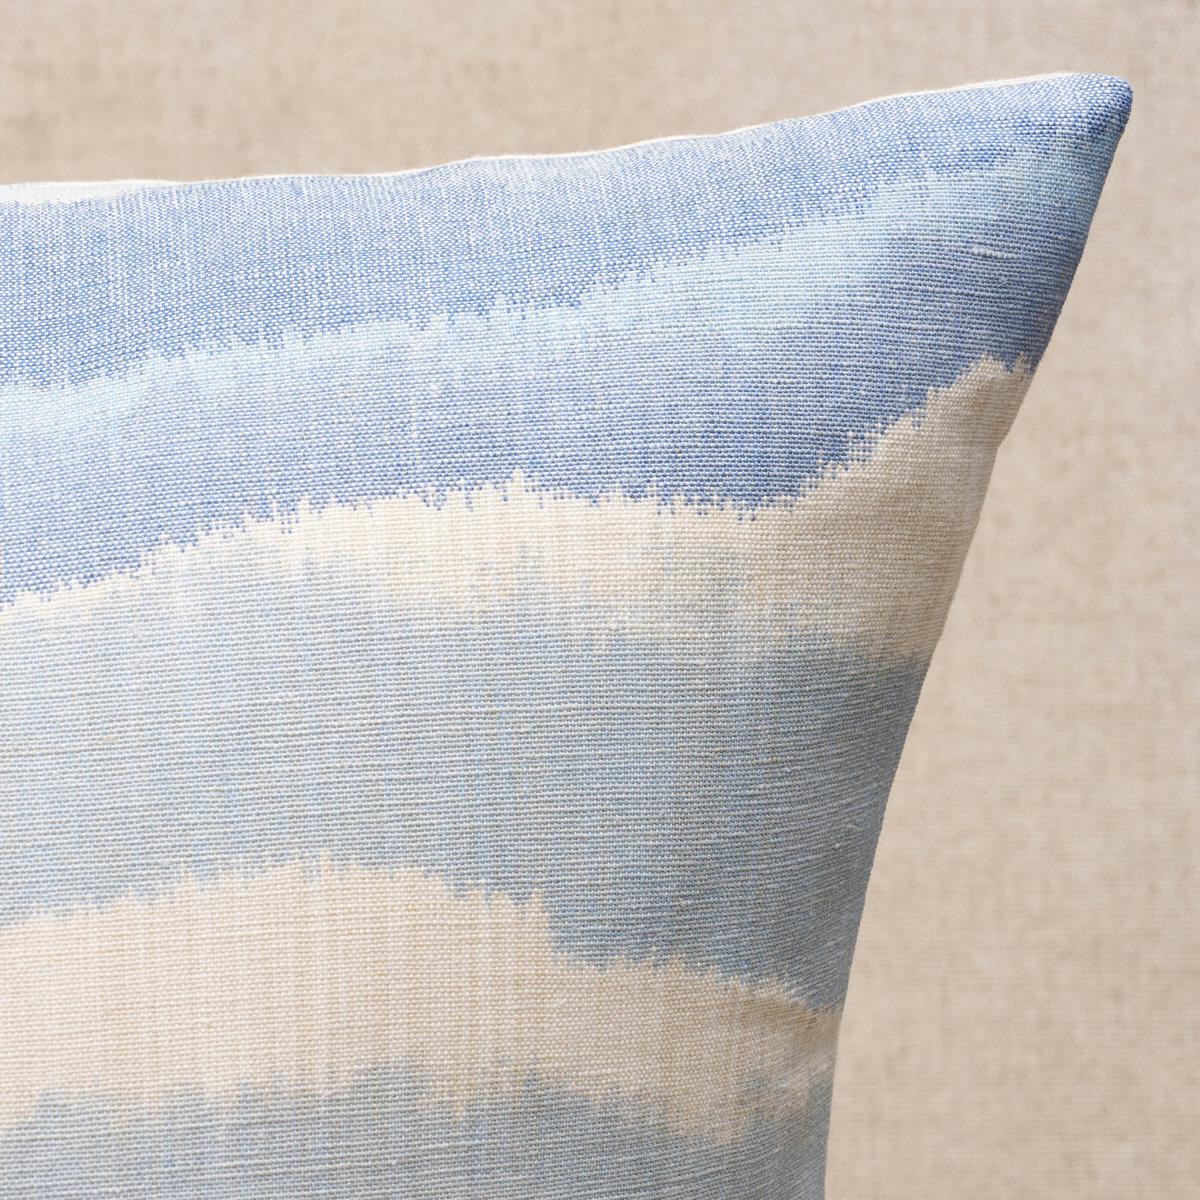 This pillow features Chandler Warp Print with a knife edge finish. Only a true warp print could achieve the ethereal effect that makes this soft horizontal stripe fabric so unique. Pillow includes a feather/down fill insert and hidden zipper